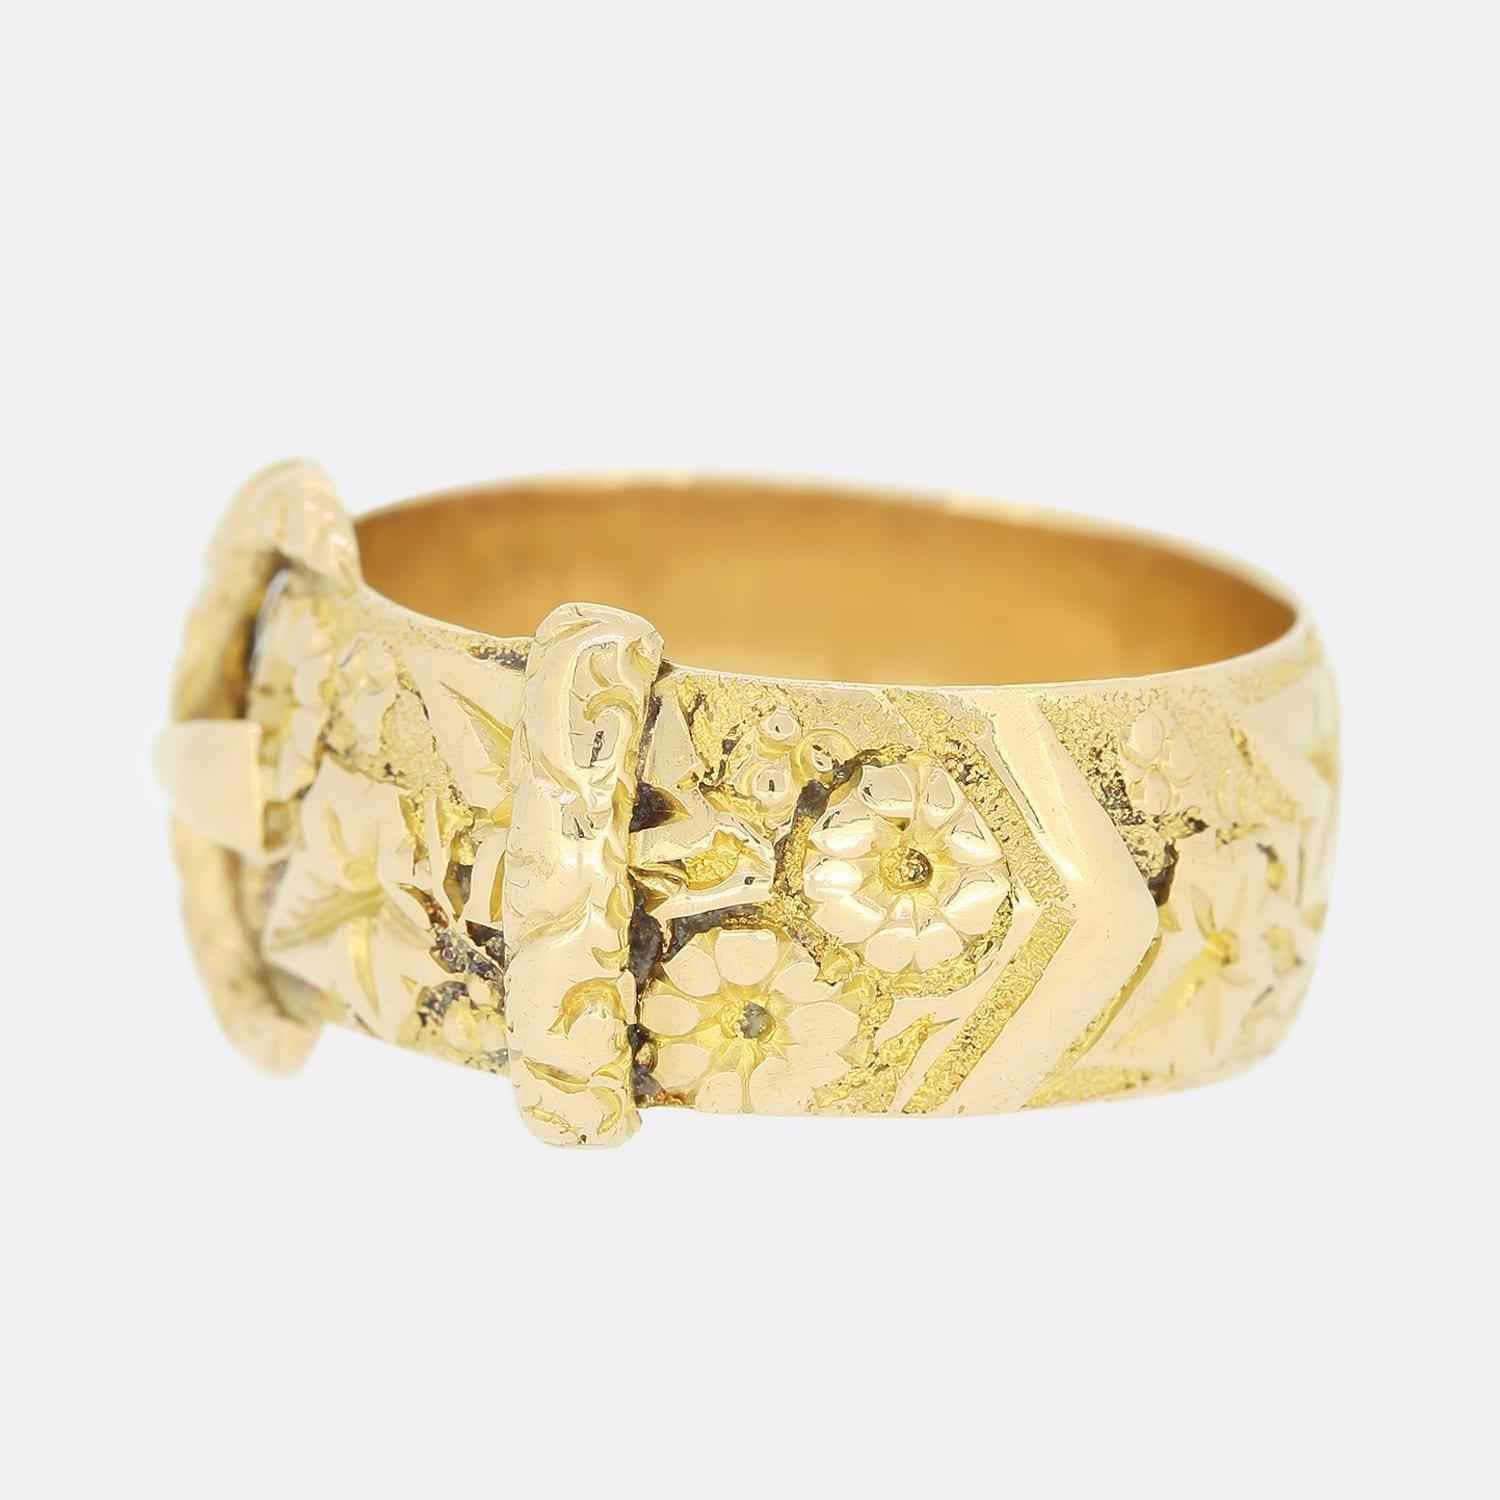 This is an 18ct yellow gold Edwardian buckle ring. The buckle features an ornate handcrafted floral pattern. The buckle motif never seems to go out of style. Popular in the 1800s and still sought after today. The tone of this ring is somewhere